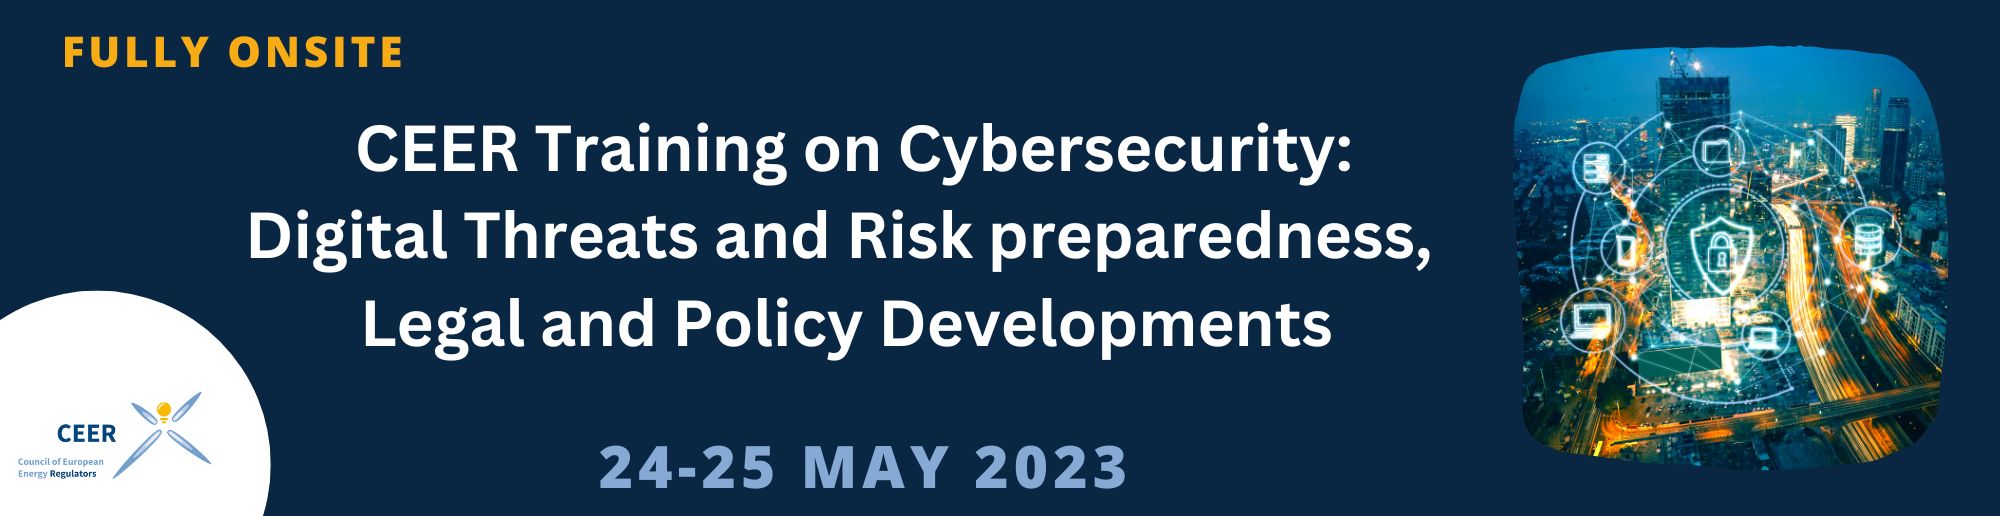 Training on Cybersecurity: Digital Threats Risk Preparedness, Legal and Policy Developments